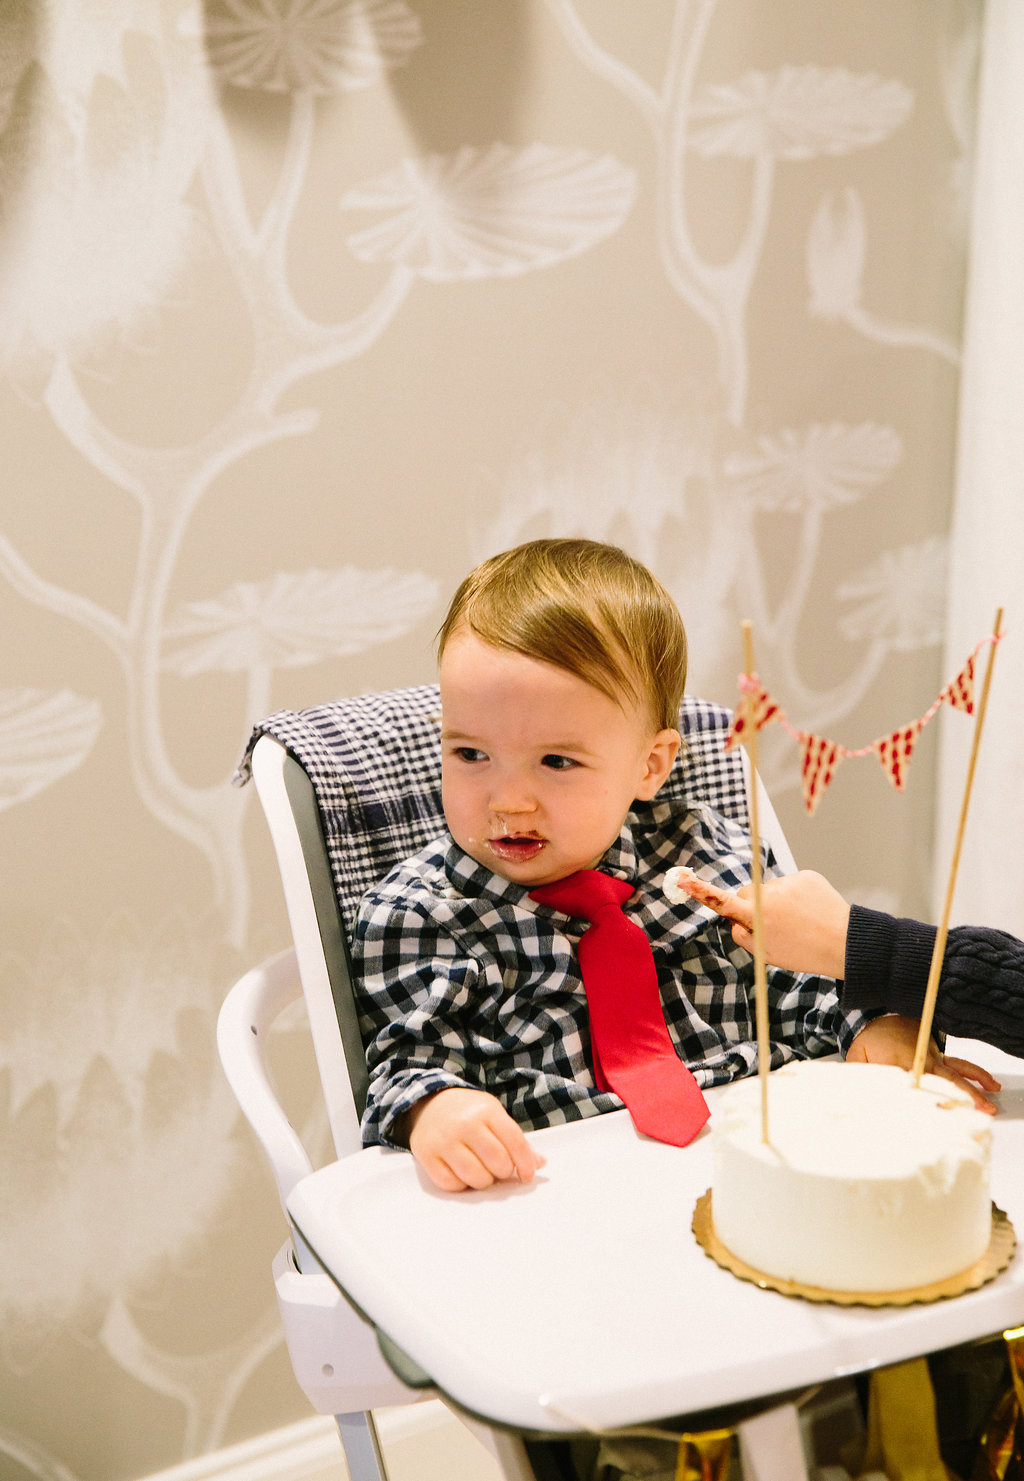 Major Martino eats his first taste of cake during his first birthday party